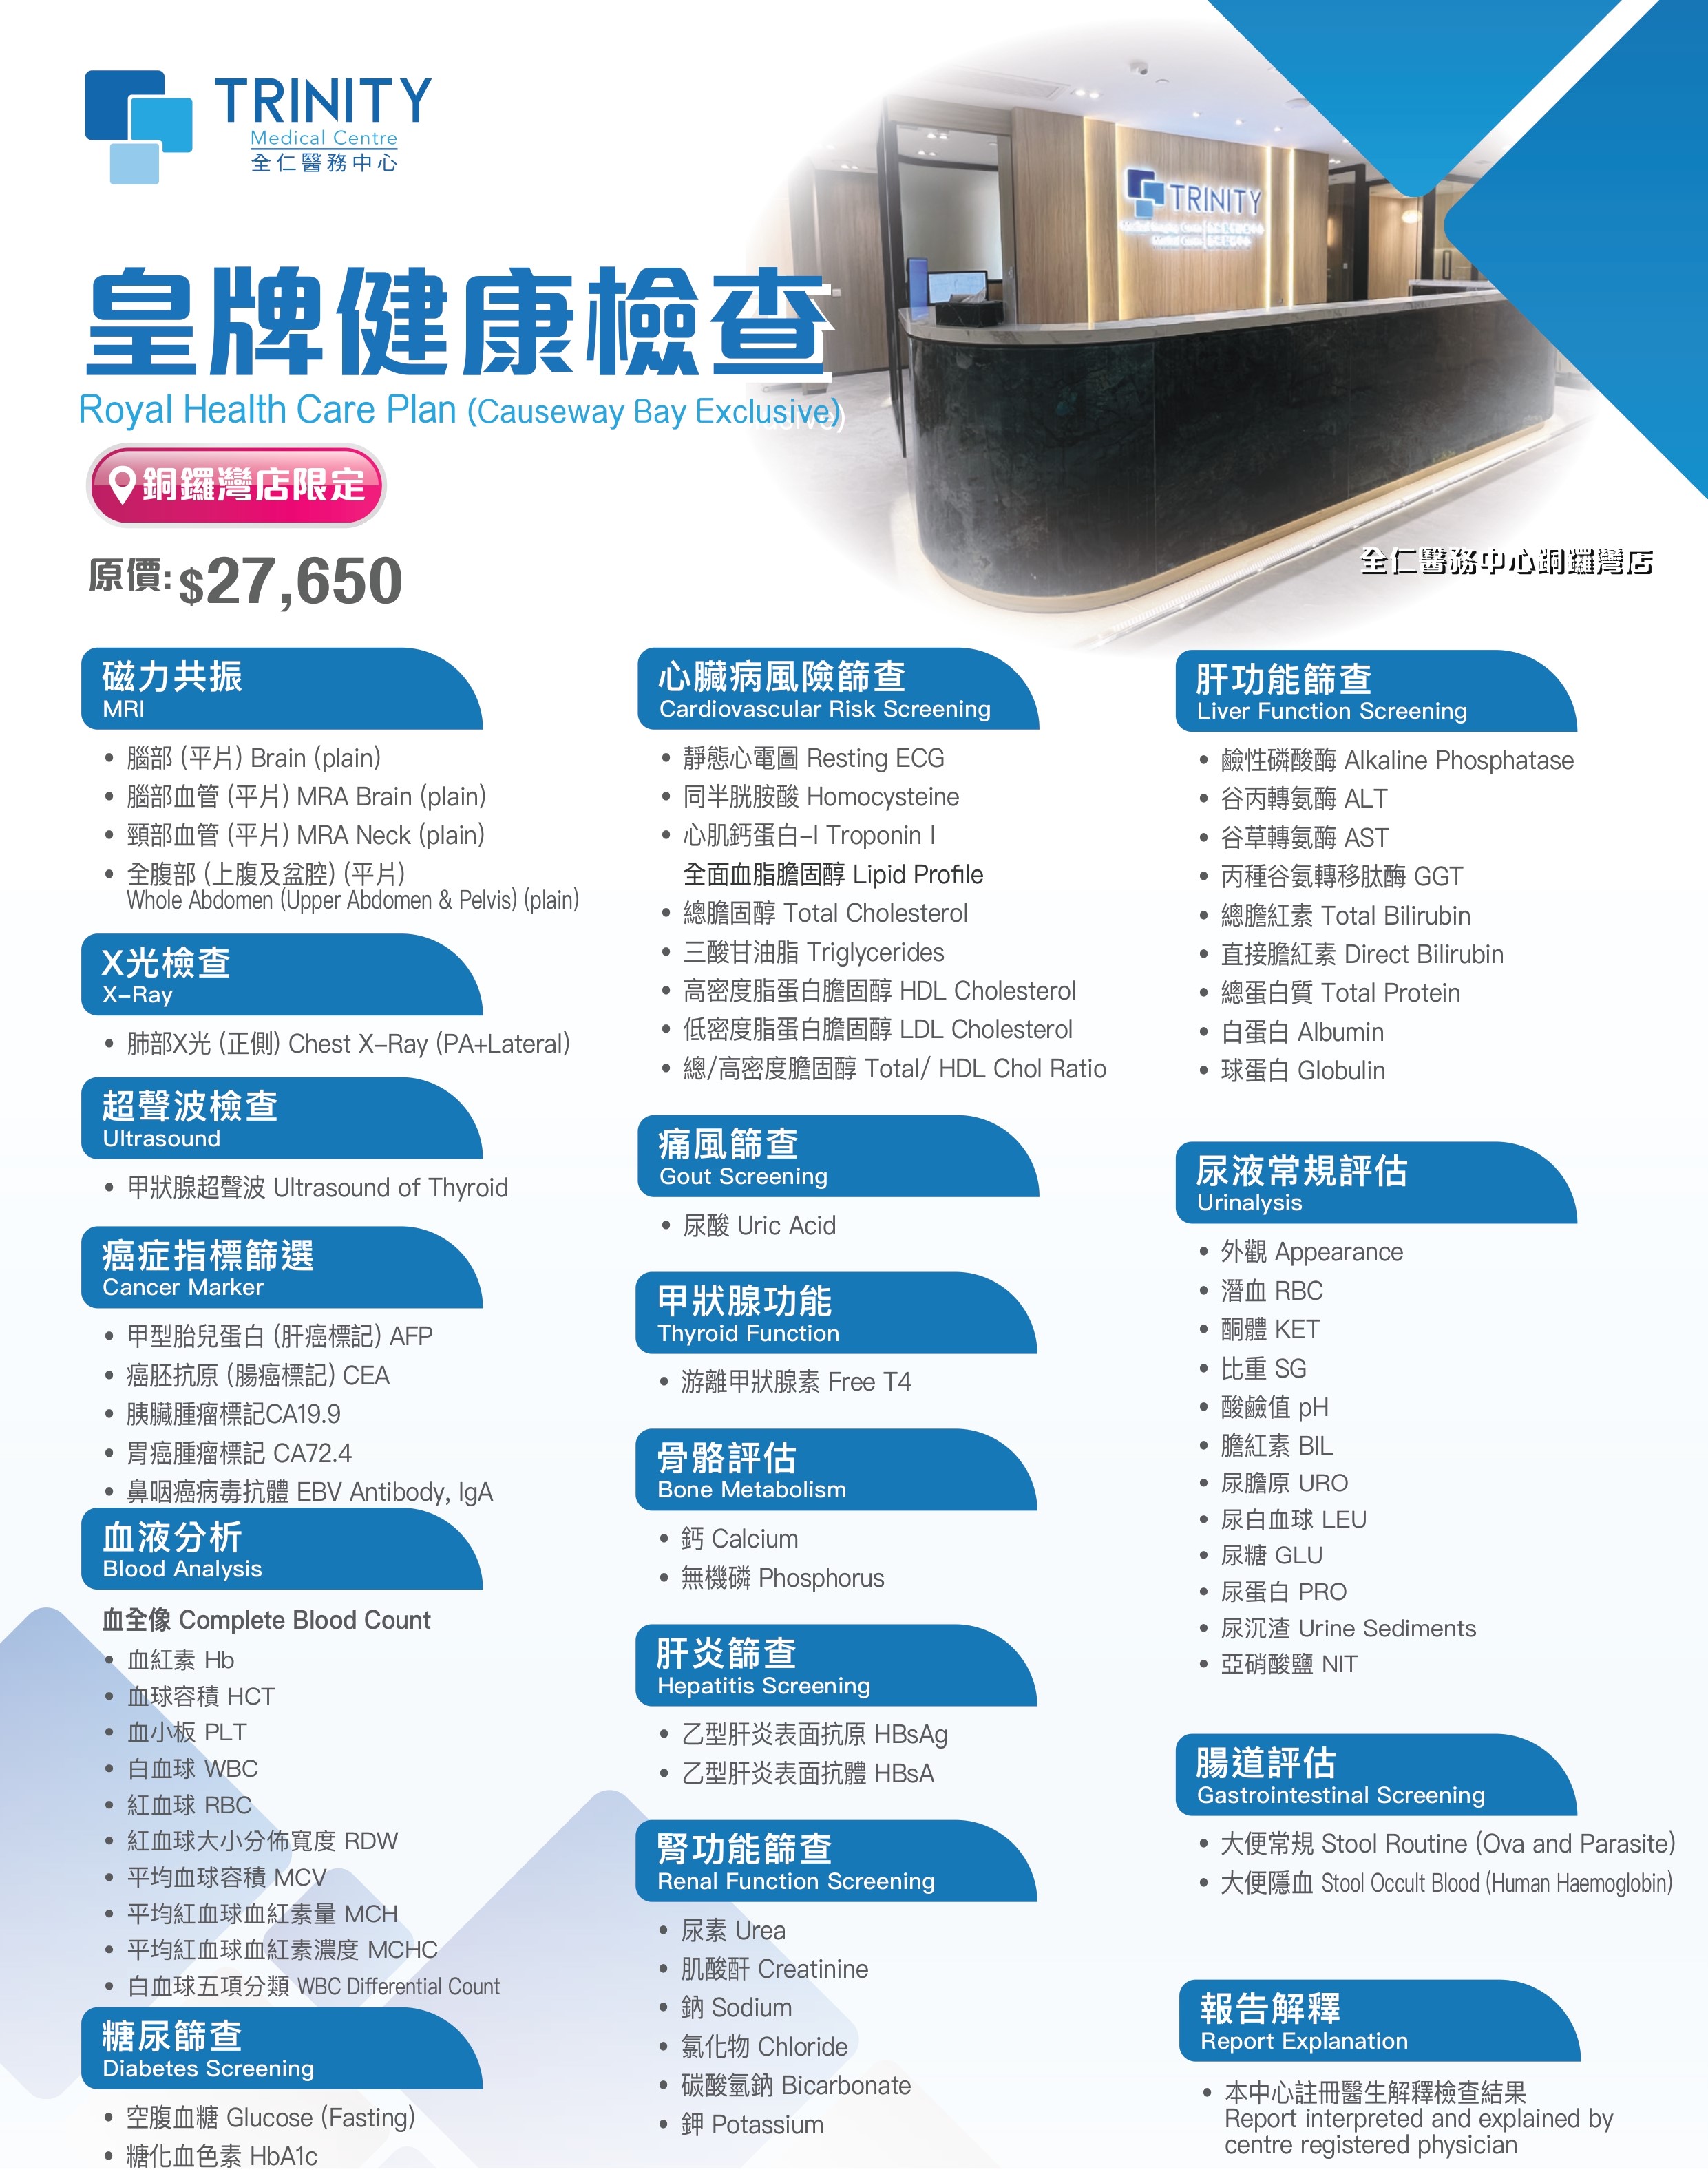 【Causeway Bay Clinic Exclusive】Royal Health Care Plan